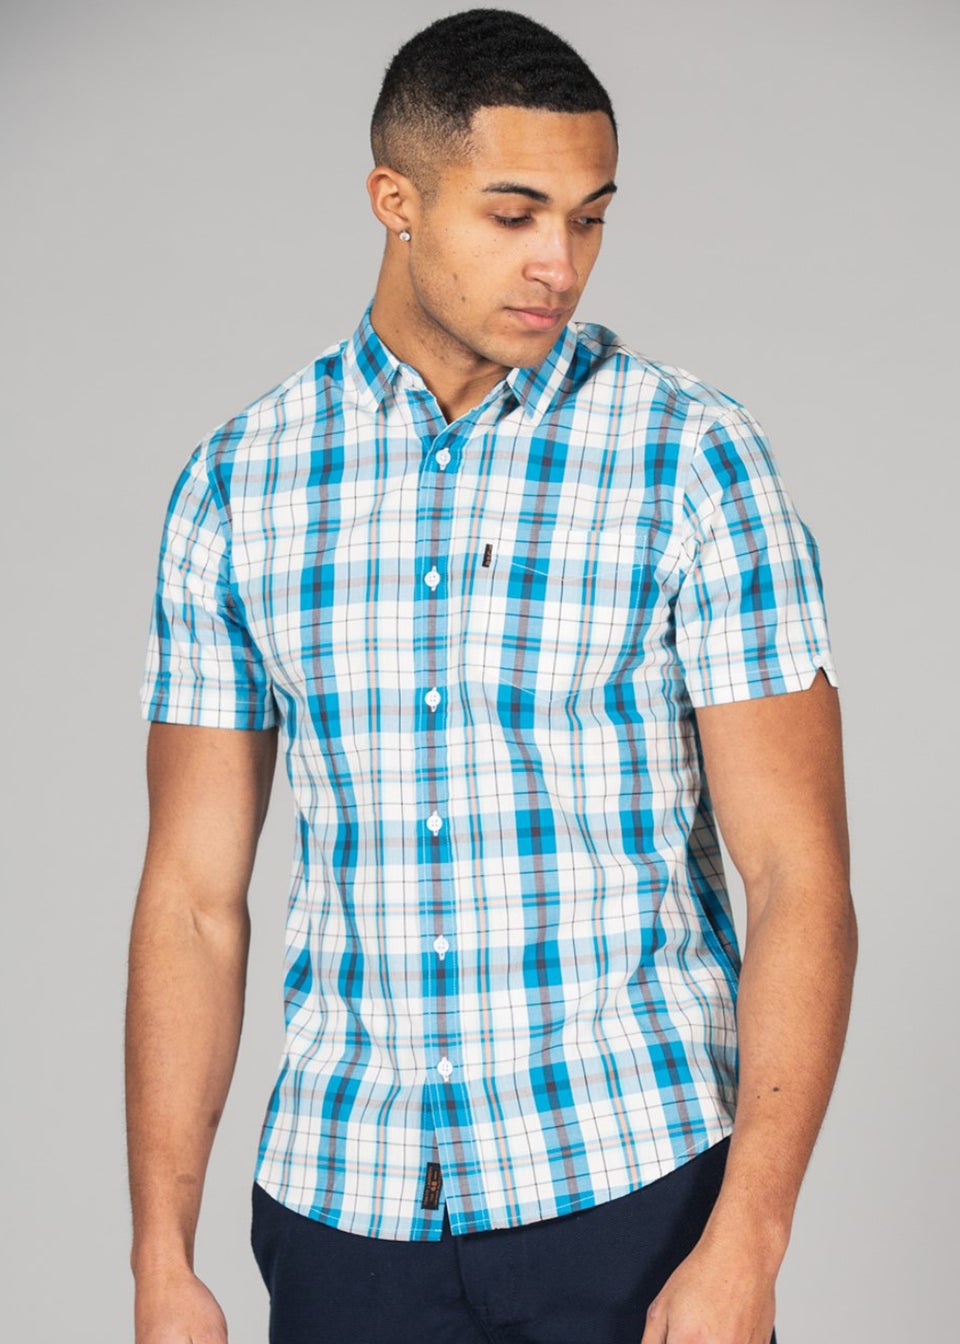 Tokyo Laundry Blue Cotton Short Sleeve Button-Up Checked Shirt